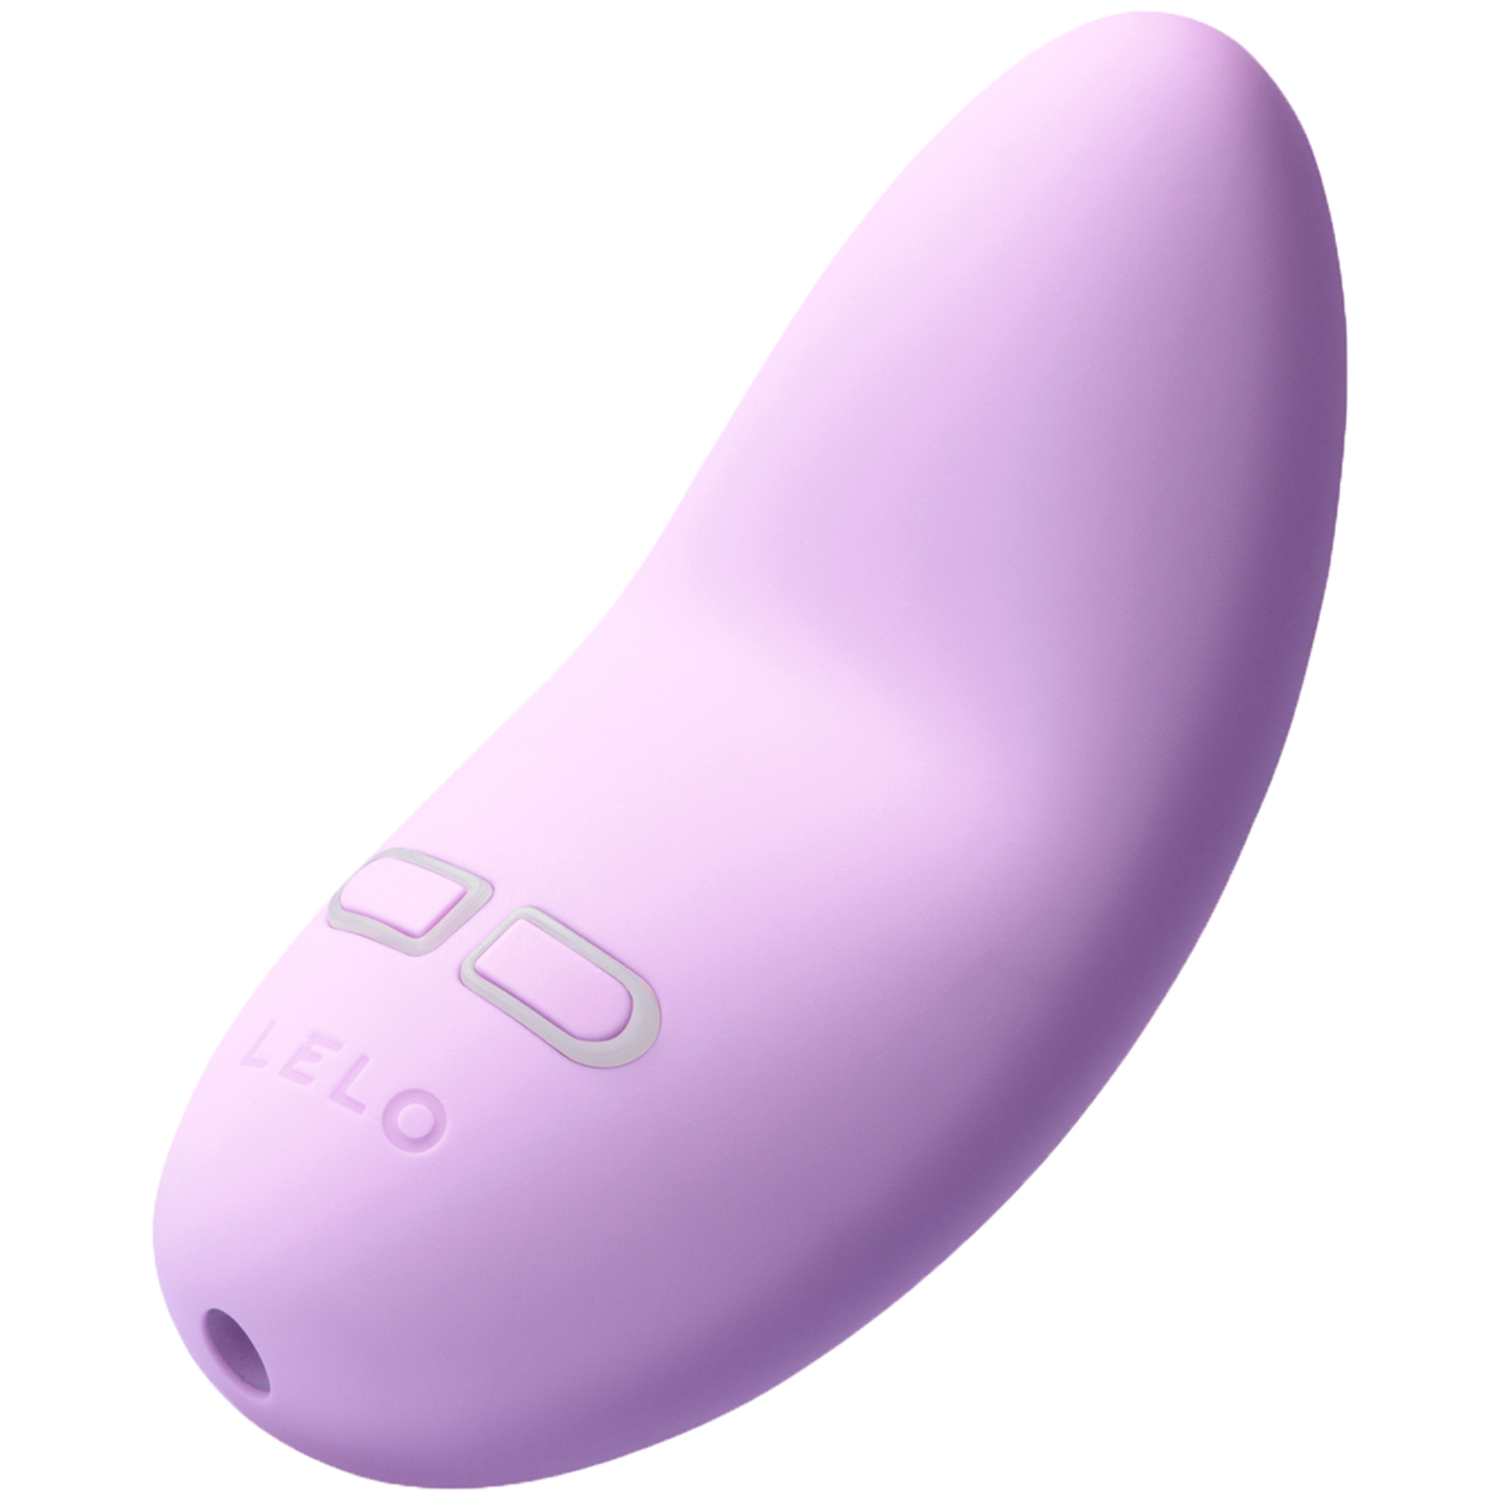 Lelo LILY 2 Personal Massager      - Pink